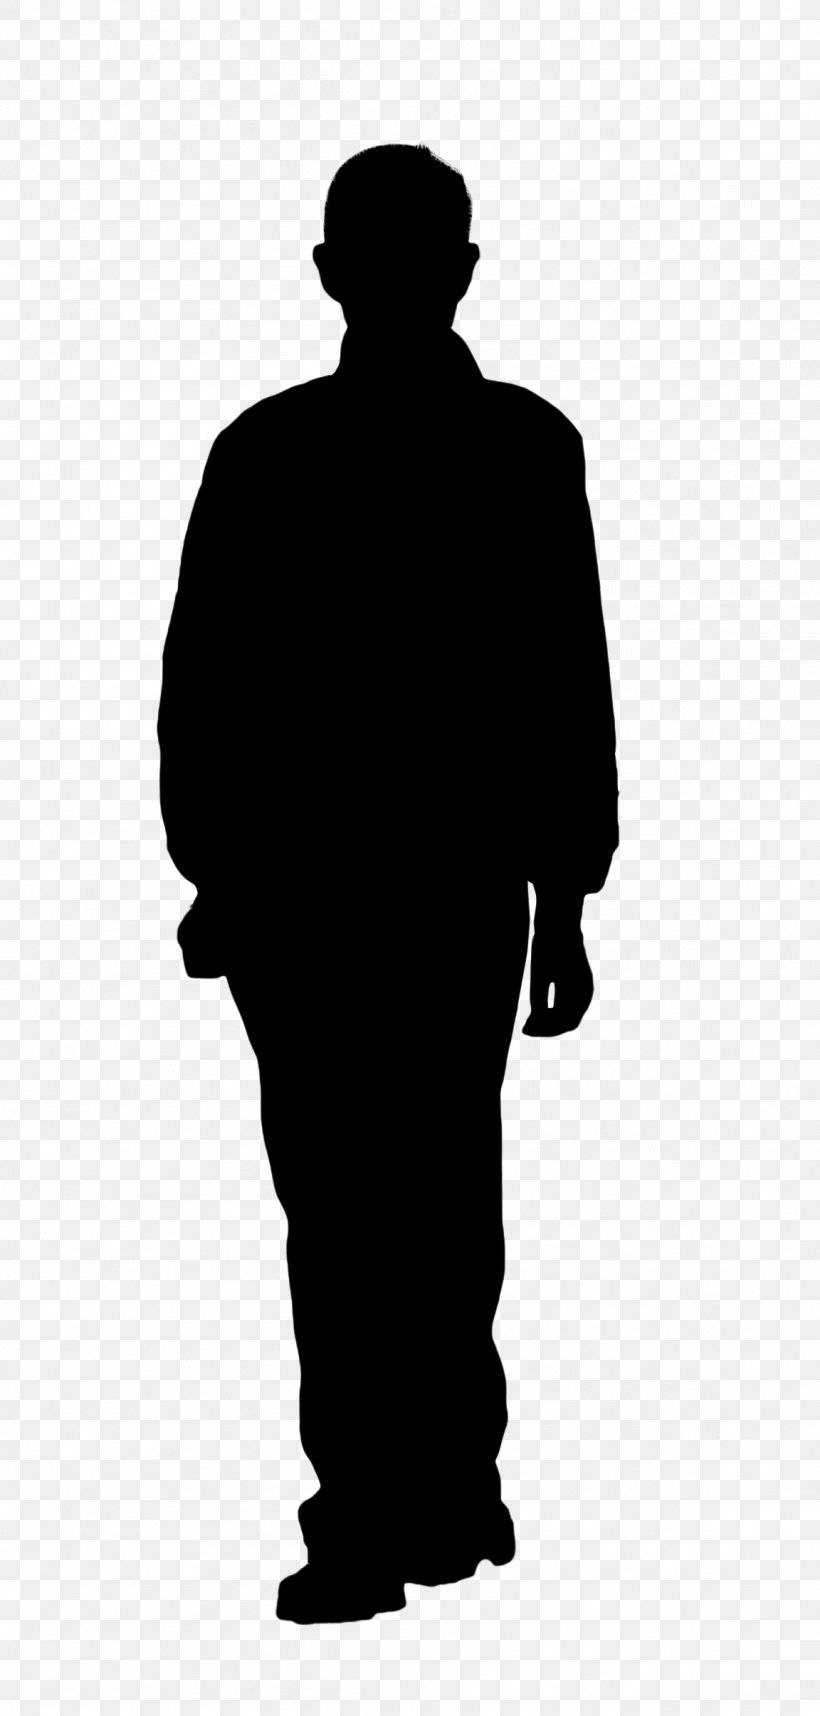 Silhouette Vector Graphics Drawing Image Illustration, PNG, 1152x2412px, Silhouette, Clothing, Drawing, Gentleman, Male Download Free